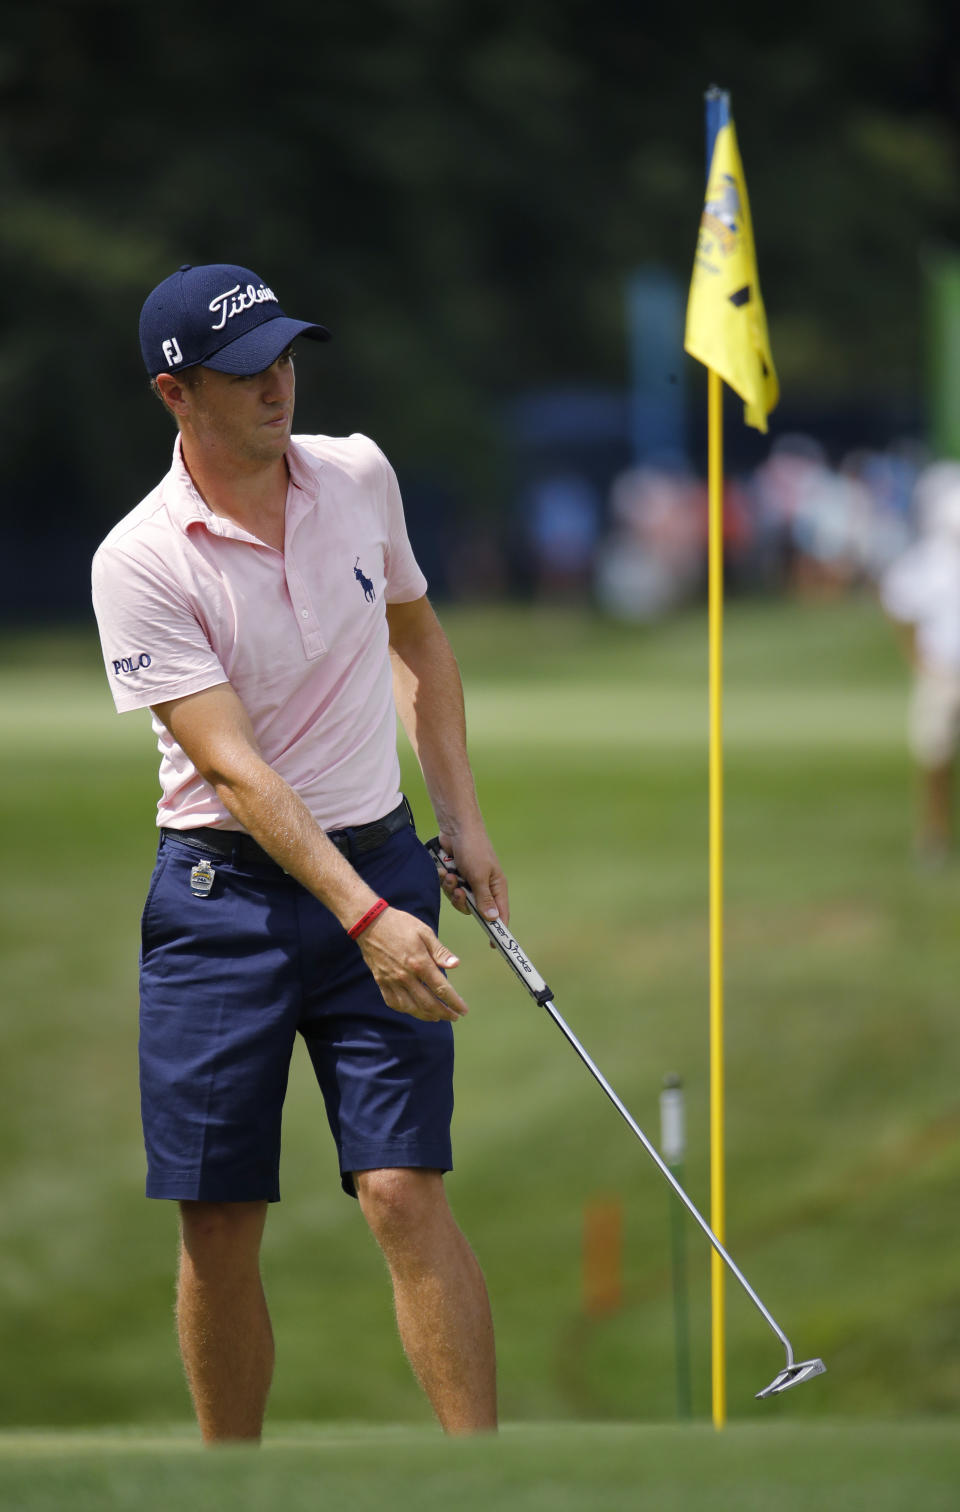 Justin Thomas watches his putt on the 14th green during a practice round for the PGA Championship golf tournament at Bellerive Country Club, Wednesday, Aug. 8, 2018, in St. Louis. (AP Photo/Charlie Riedel)